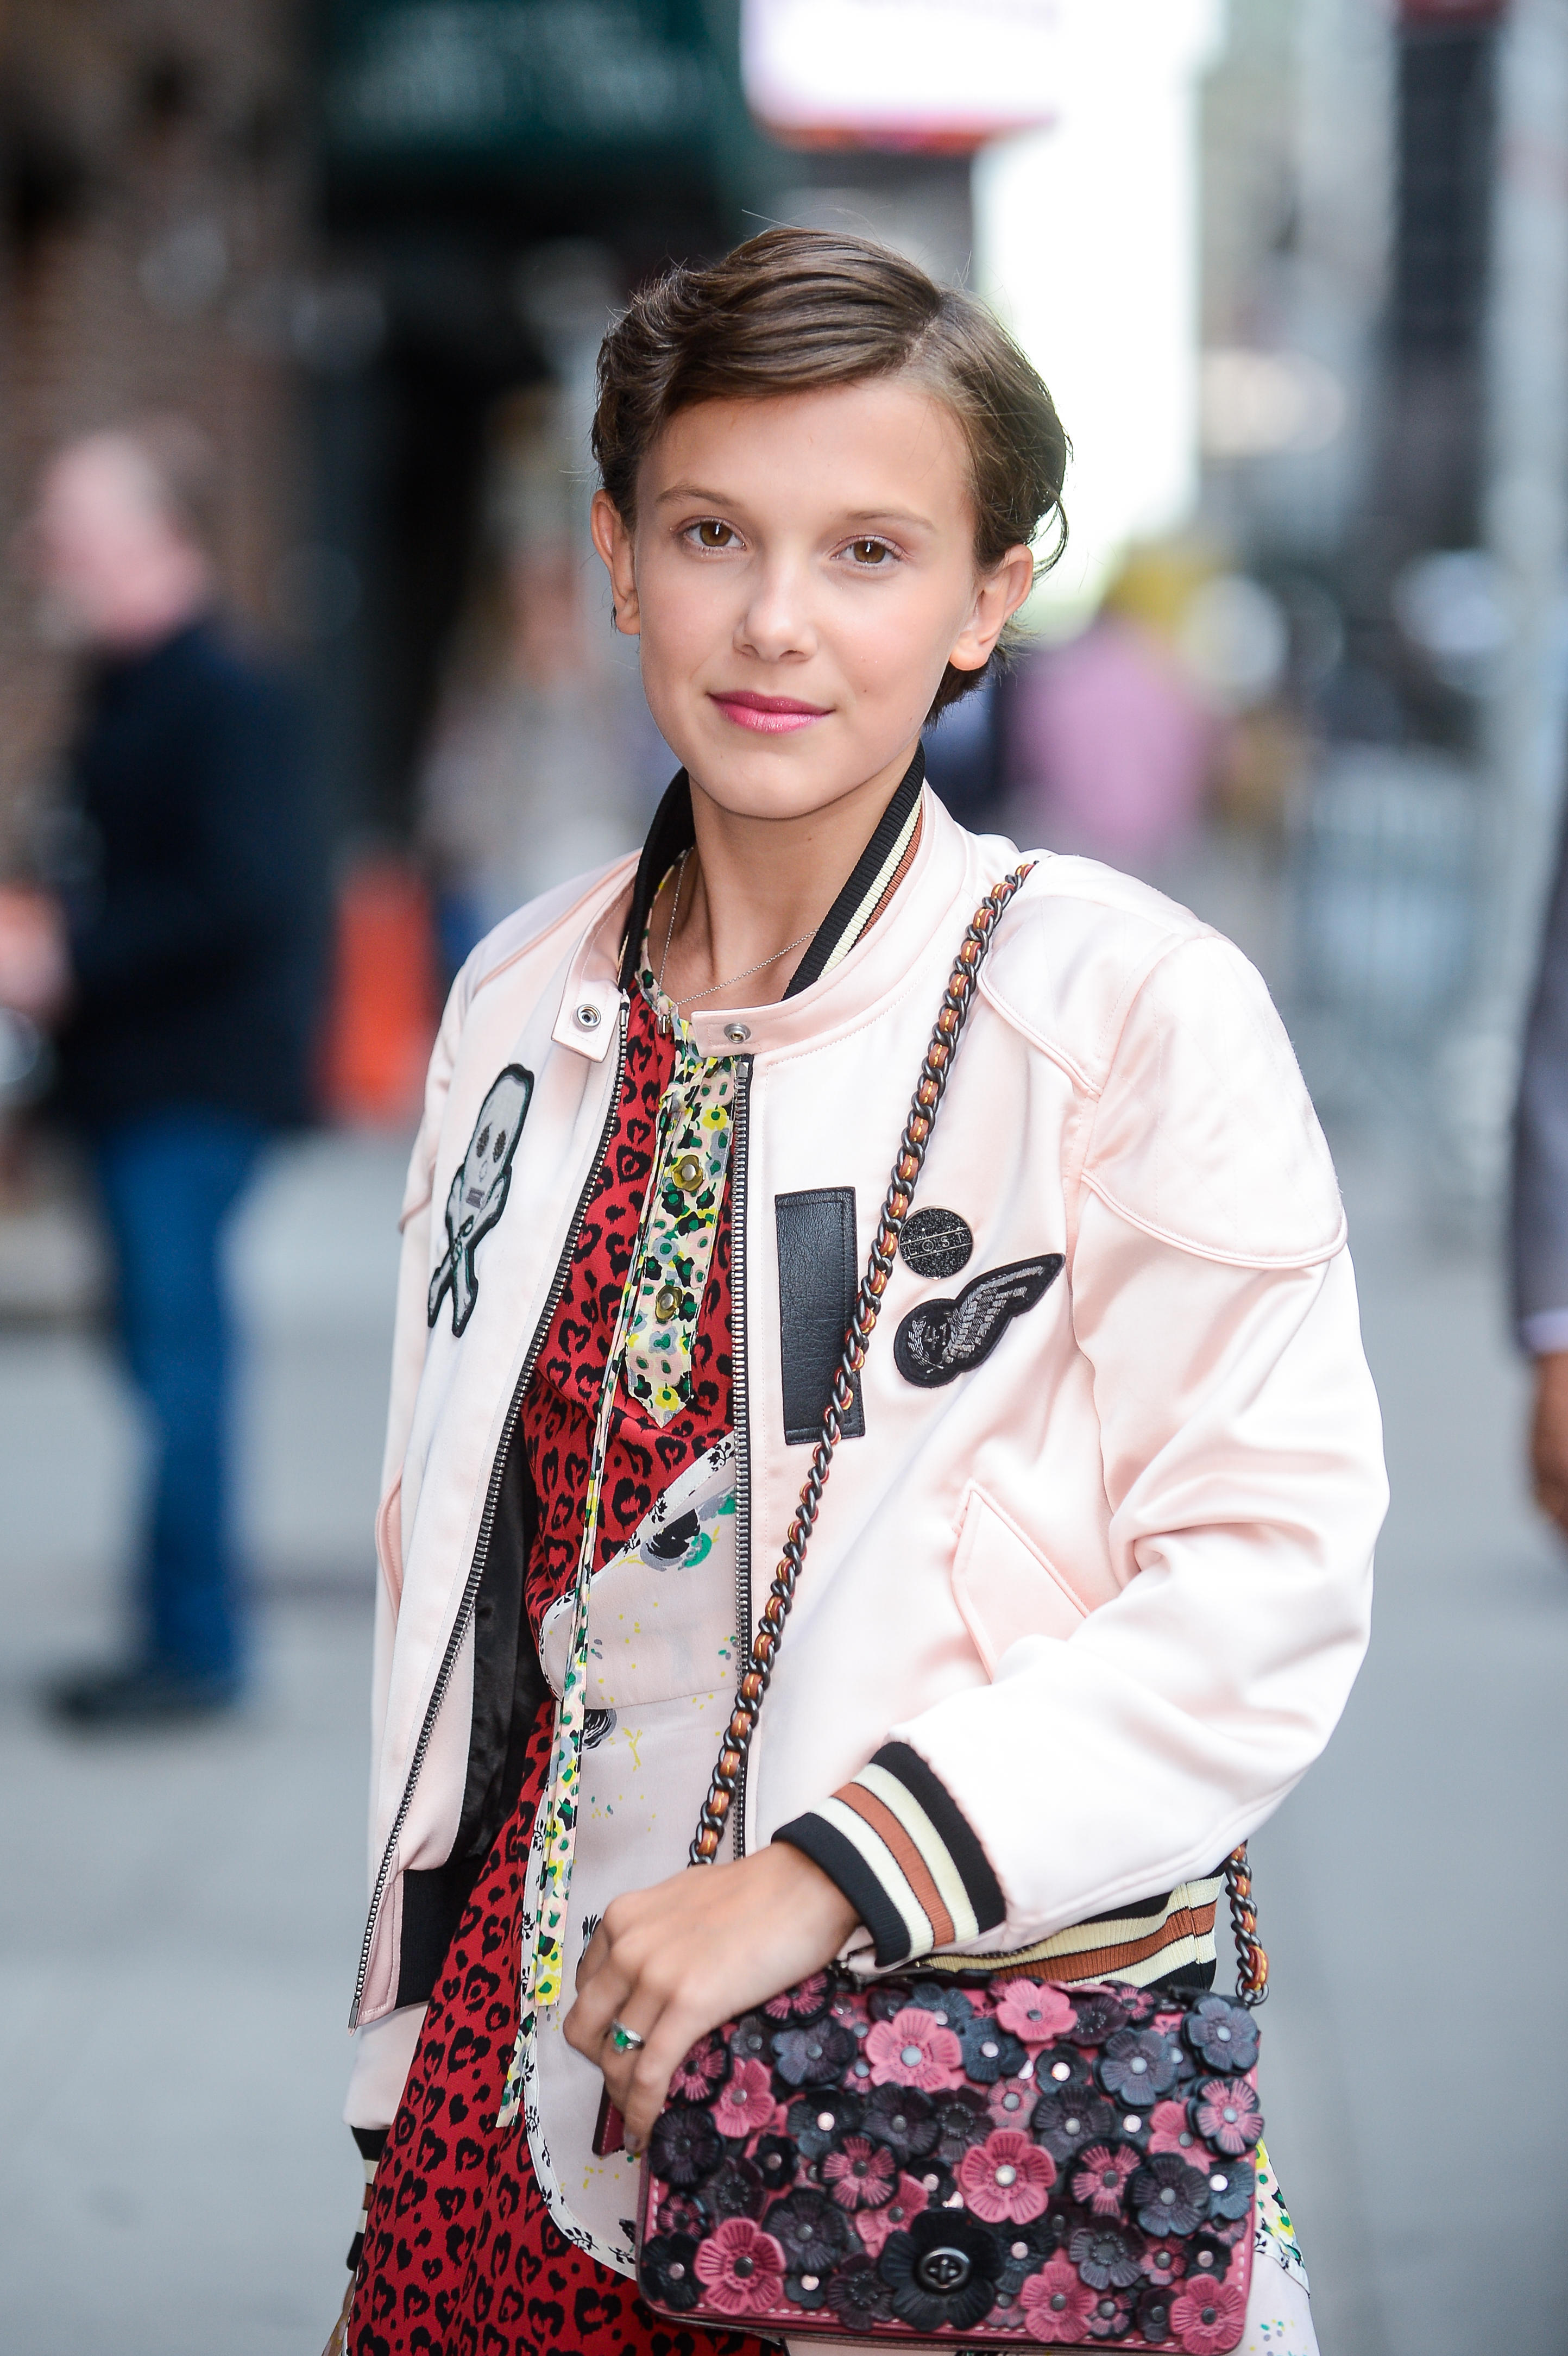 Millie Bobby Brown Wallpapers High Quality | Download Free